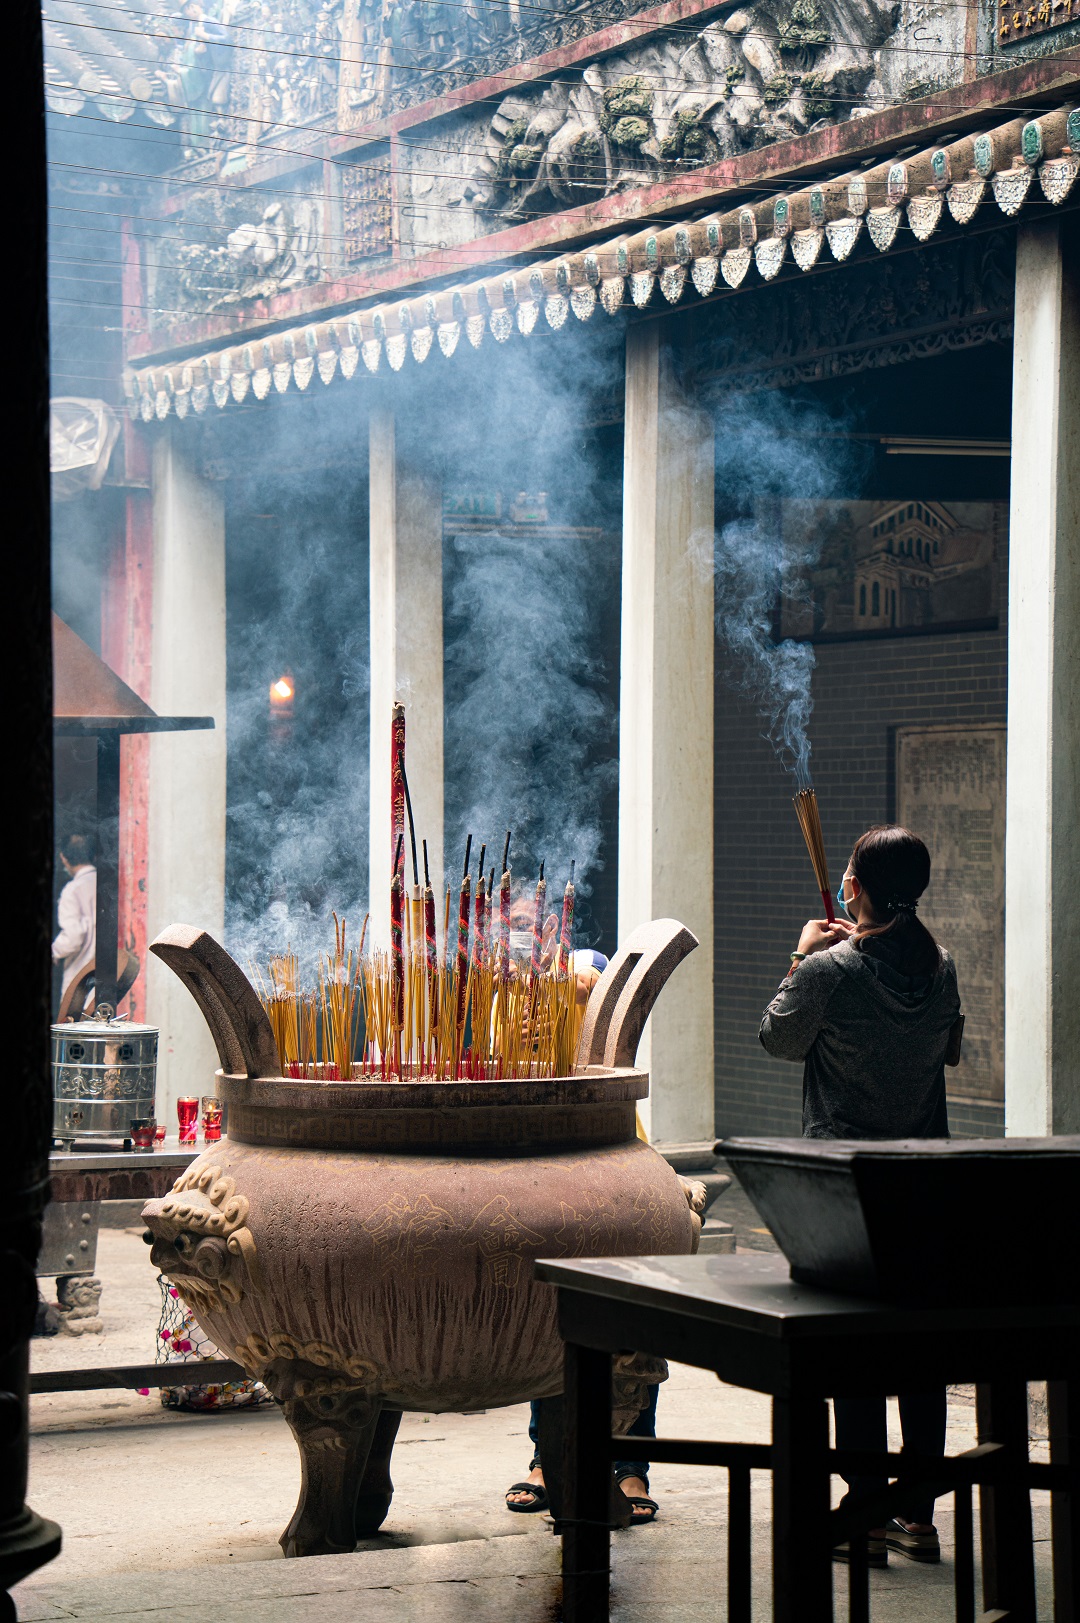 A large censer in the temple. Photo: Nguyen Trung Au / Tuoi Tre News